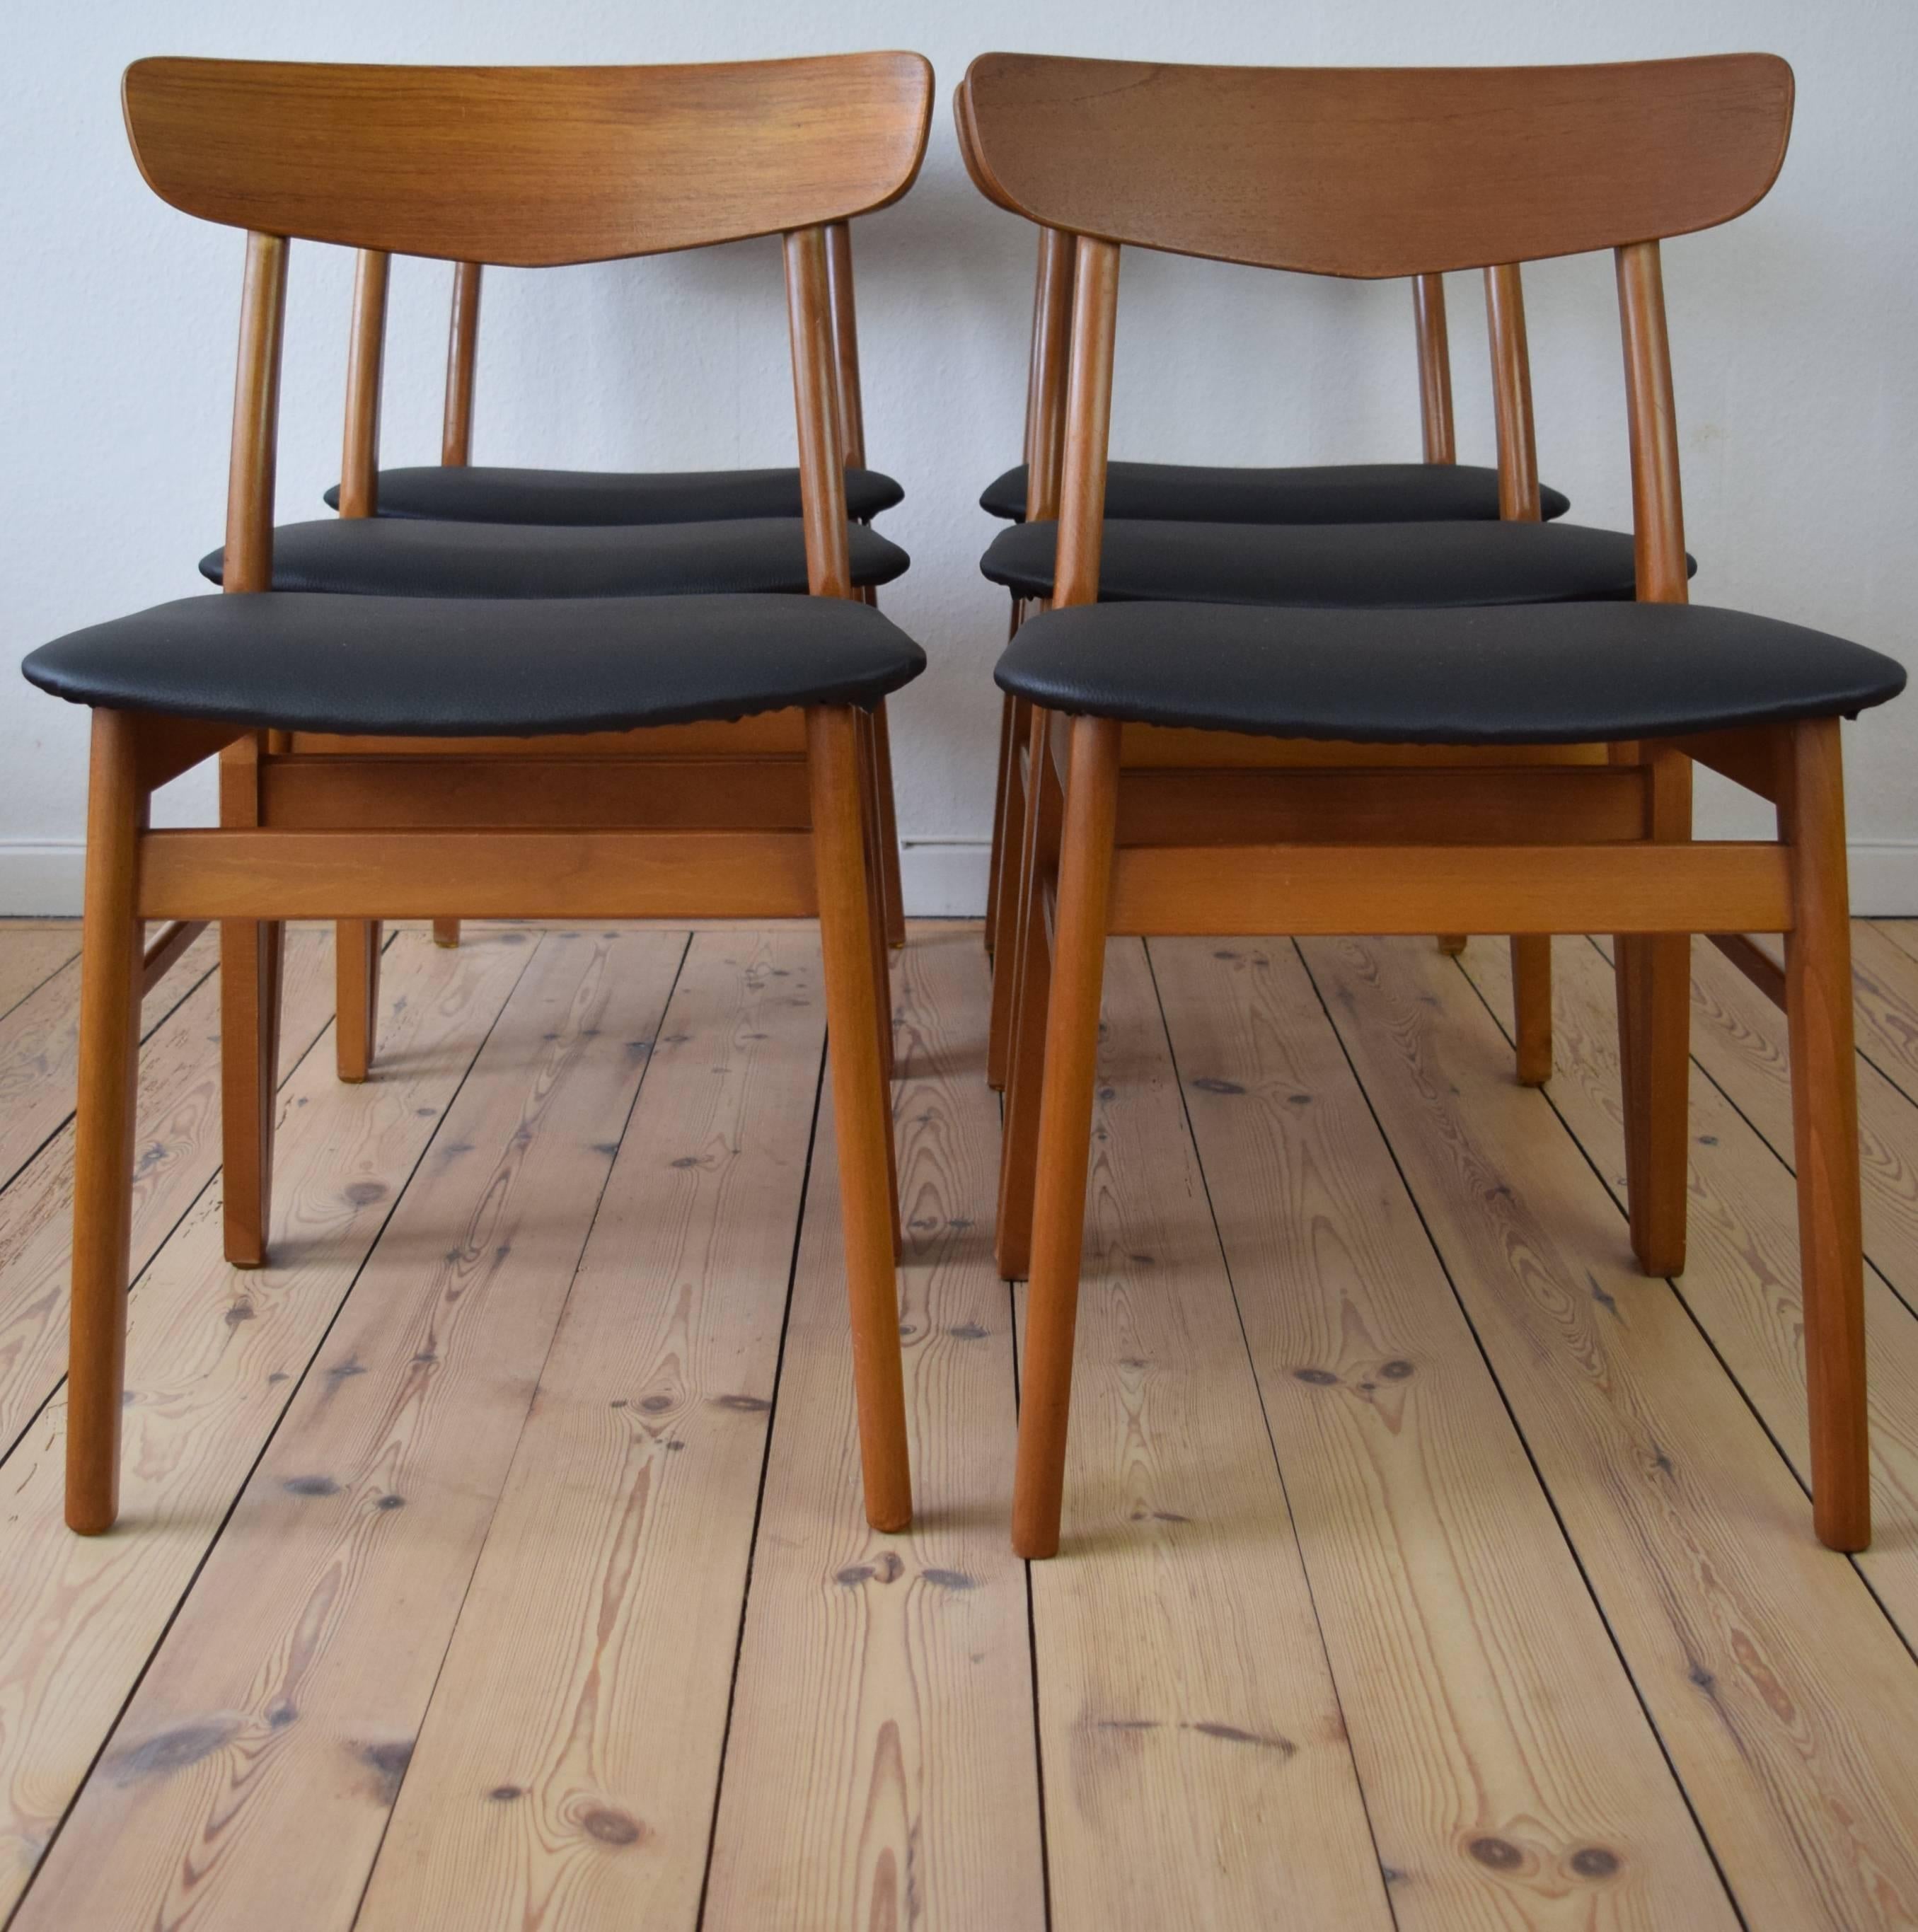 1960s dining chairs